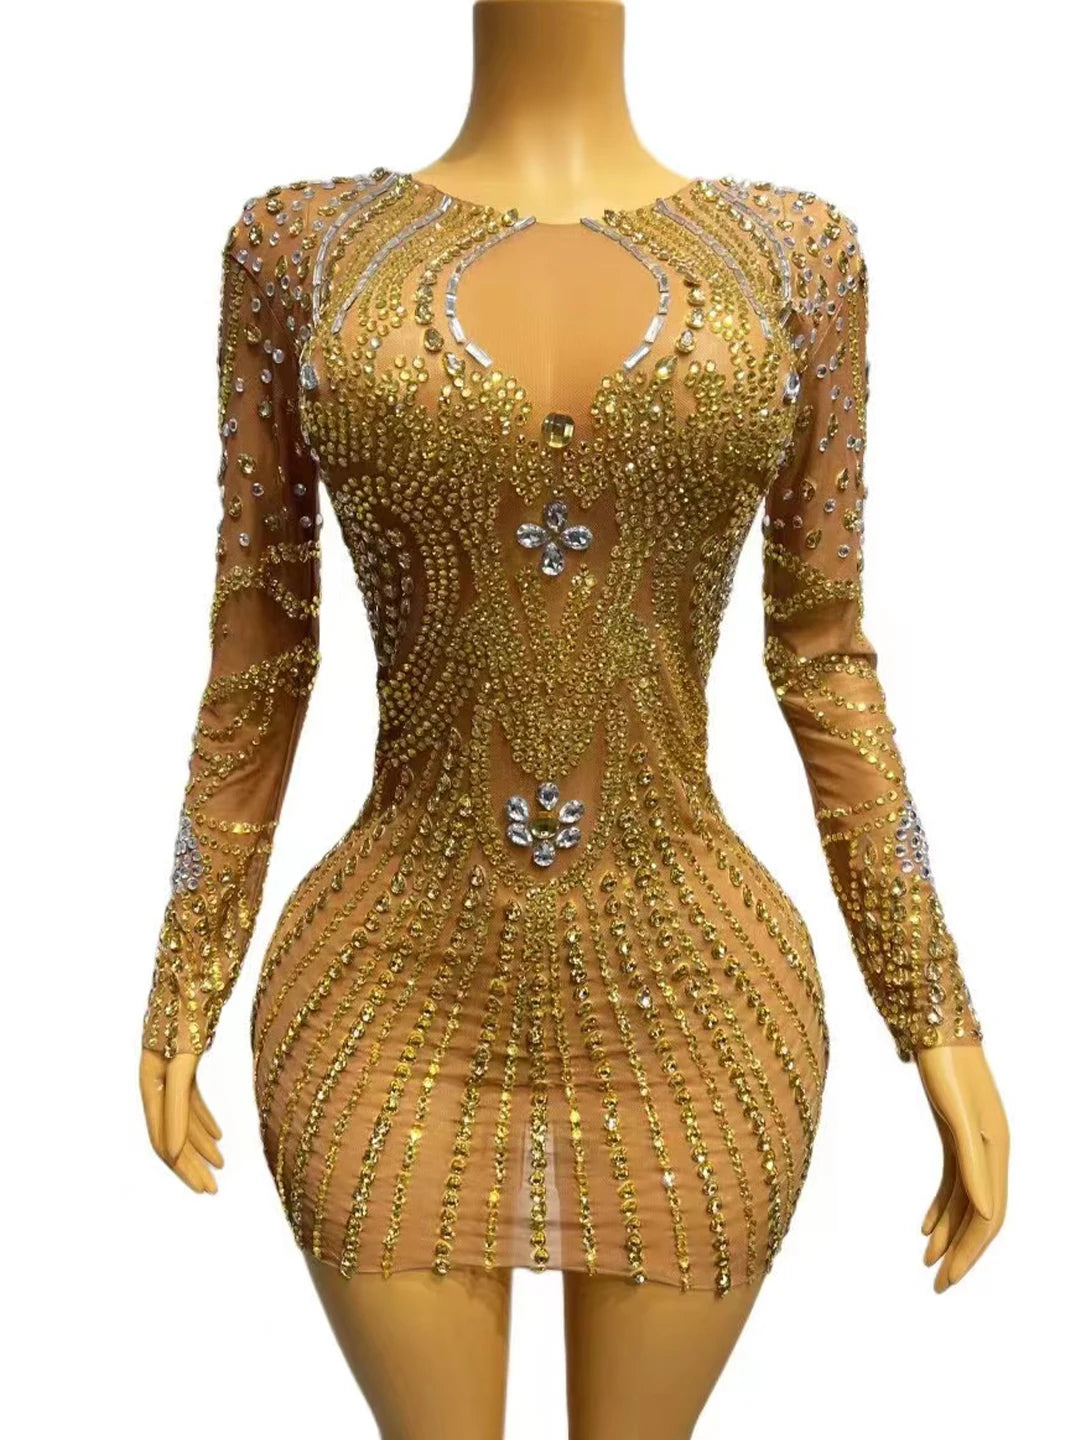 Women Sexy Stage Flashing Gold Rhinestones Birthday Celebrate Evening Club Costume Long Sleeves Dance Photo Shoot Outfit